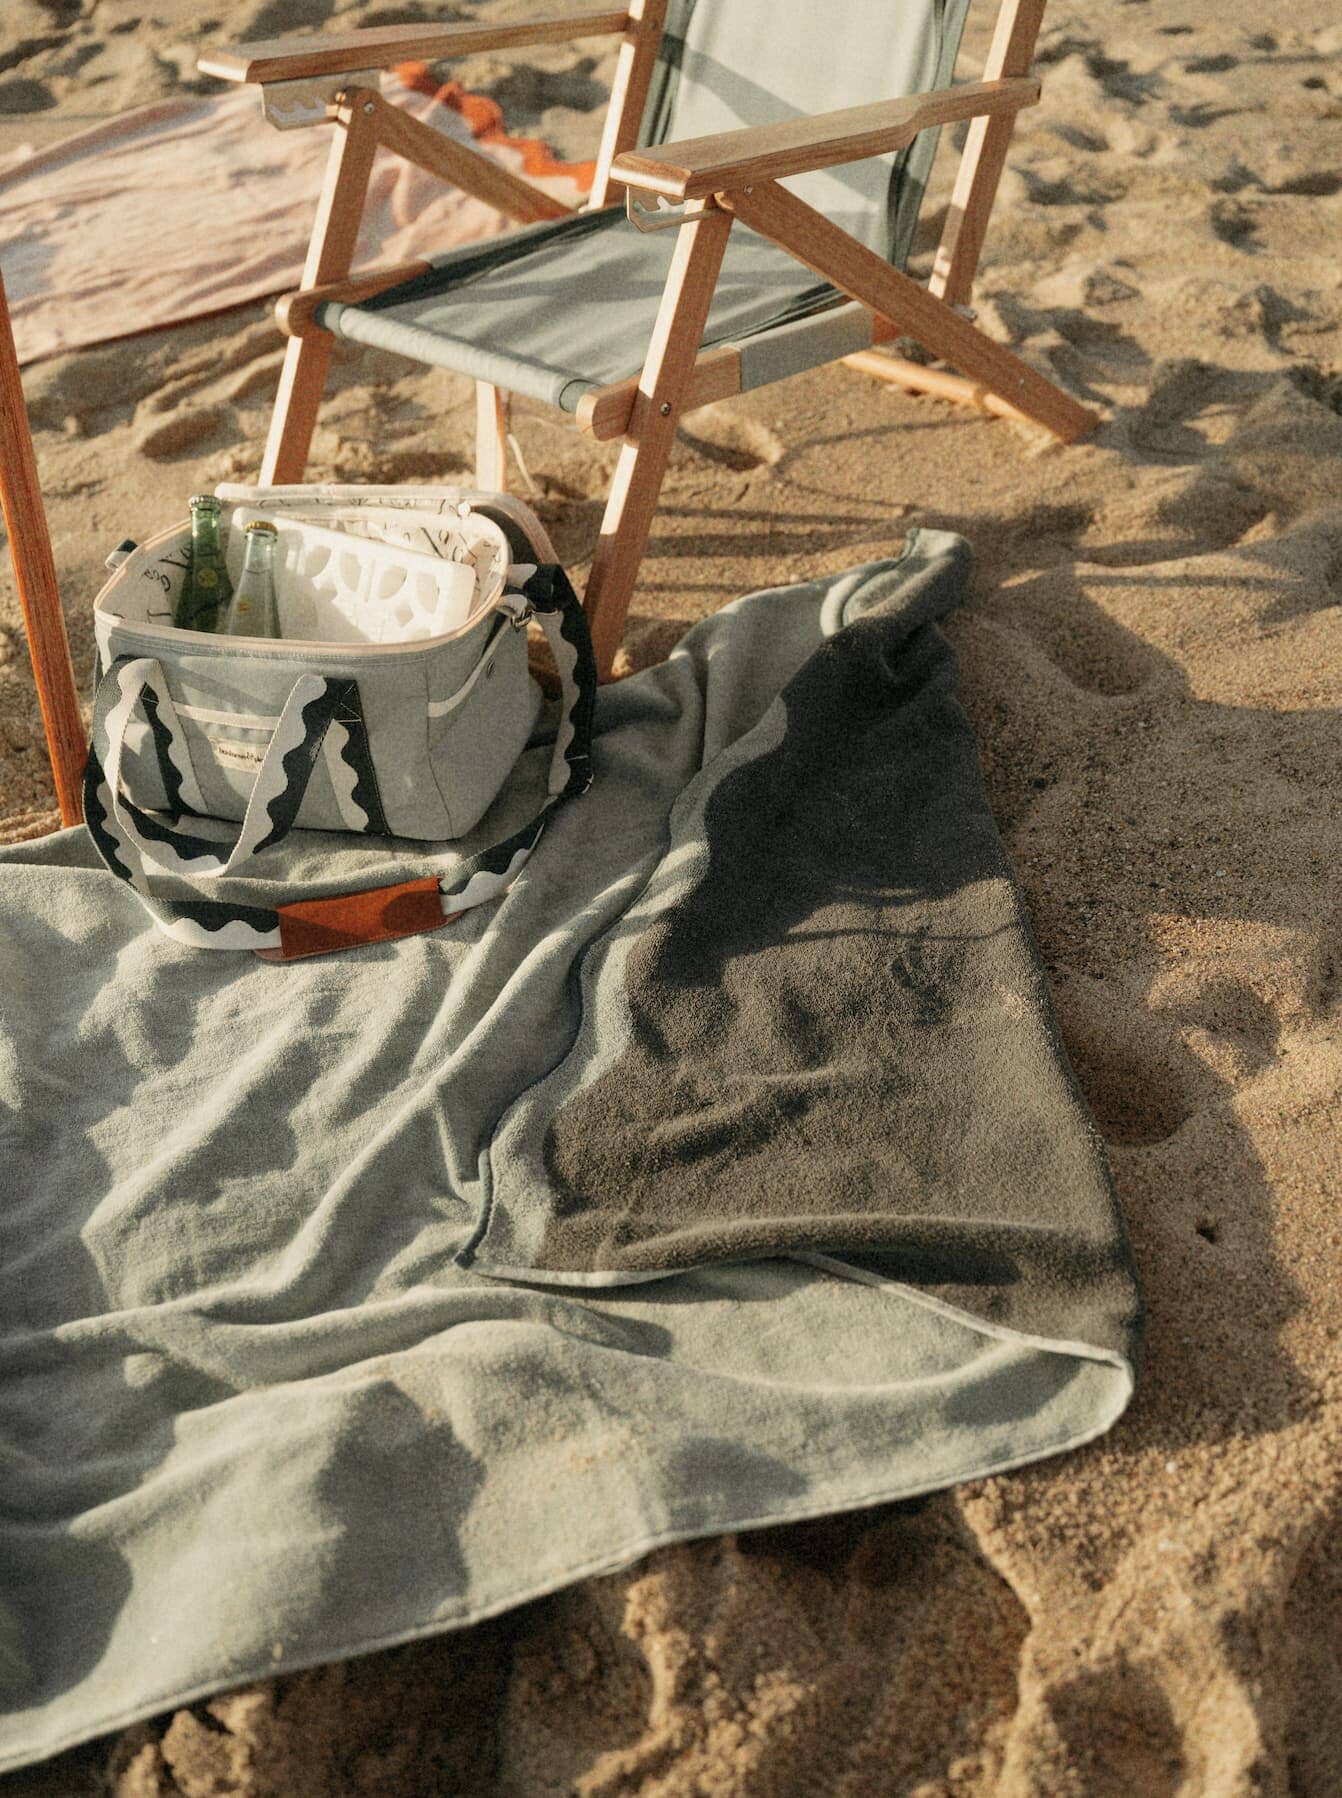 riviera green towel and cooler bag on the beach